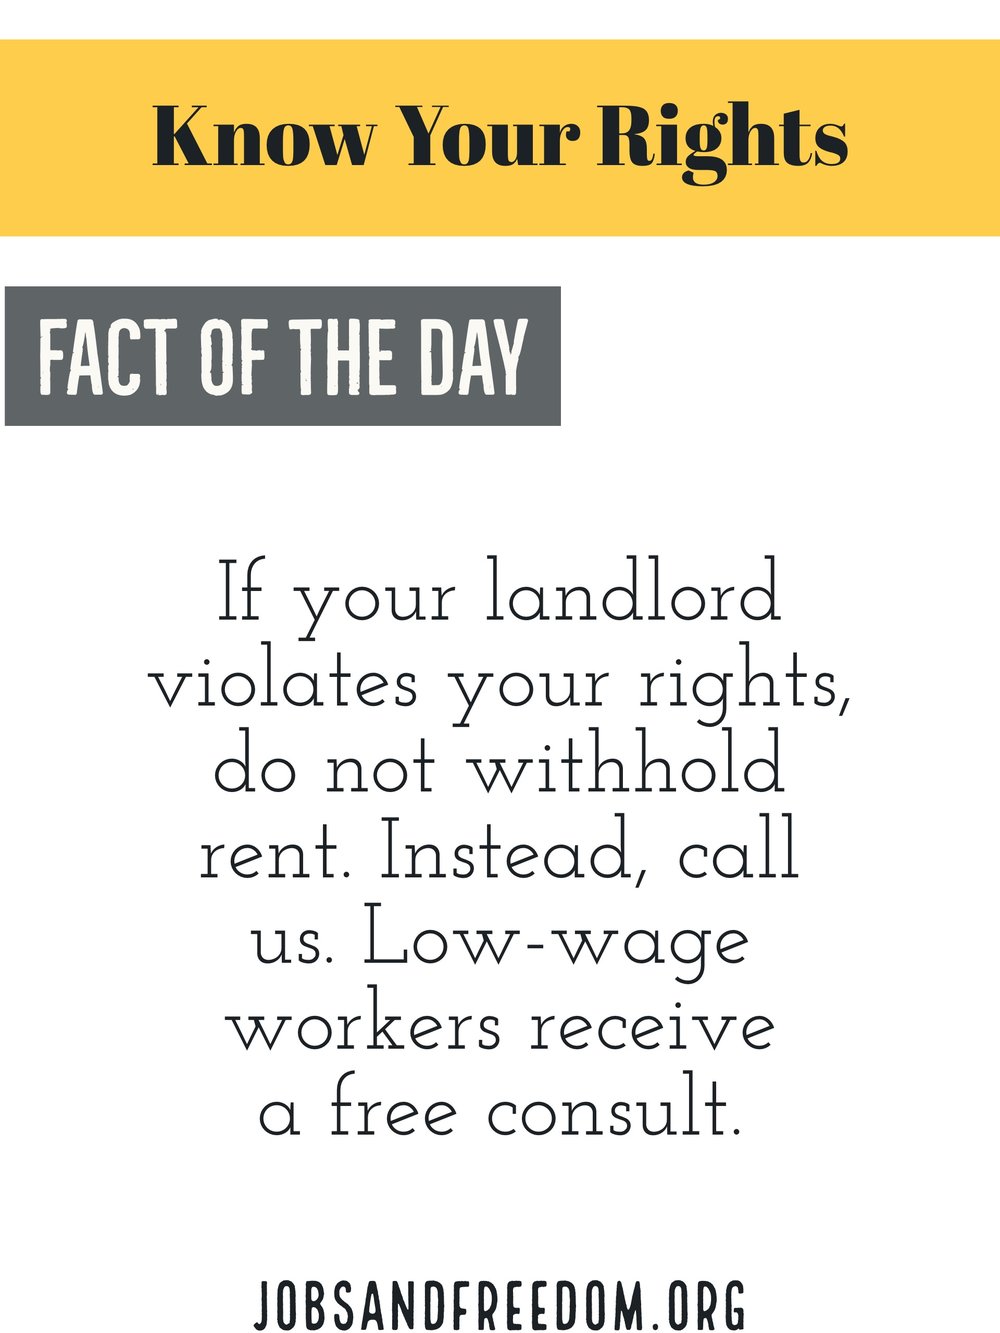 My landlord refuses to fix the heat, can I withhold rent? — Heartland  Center for Jobs and Freedom